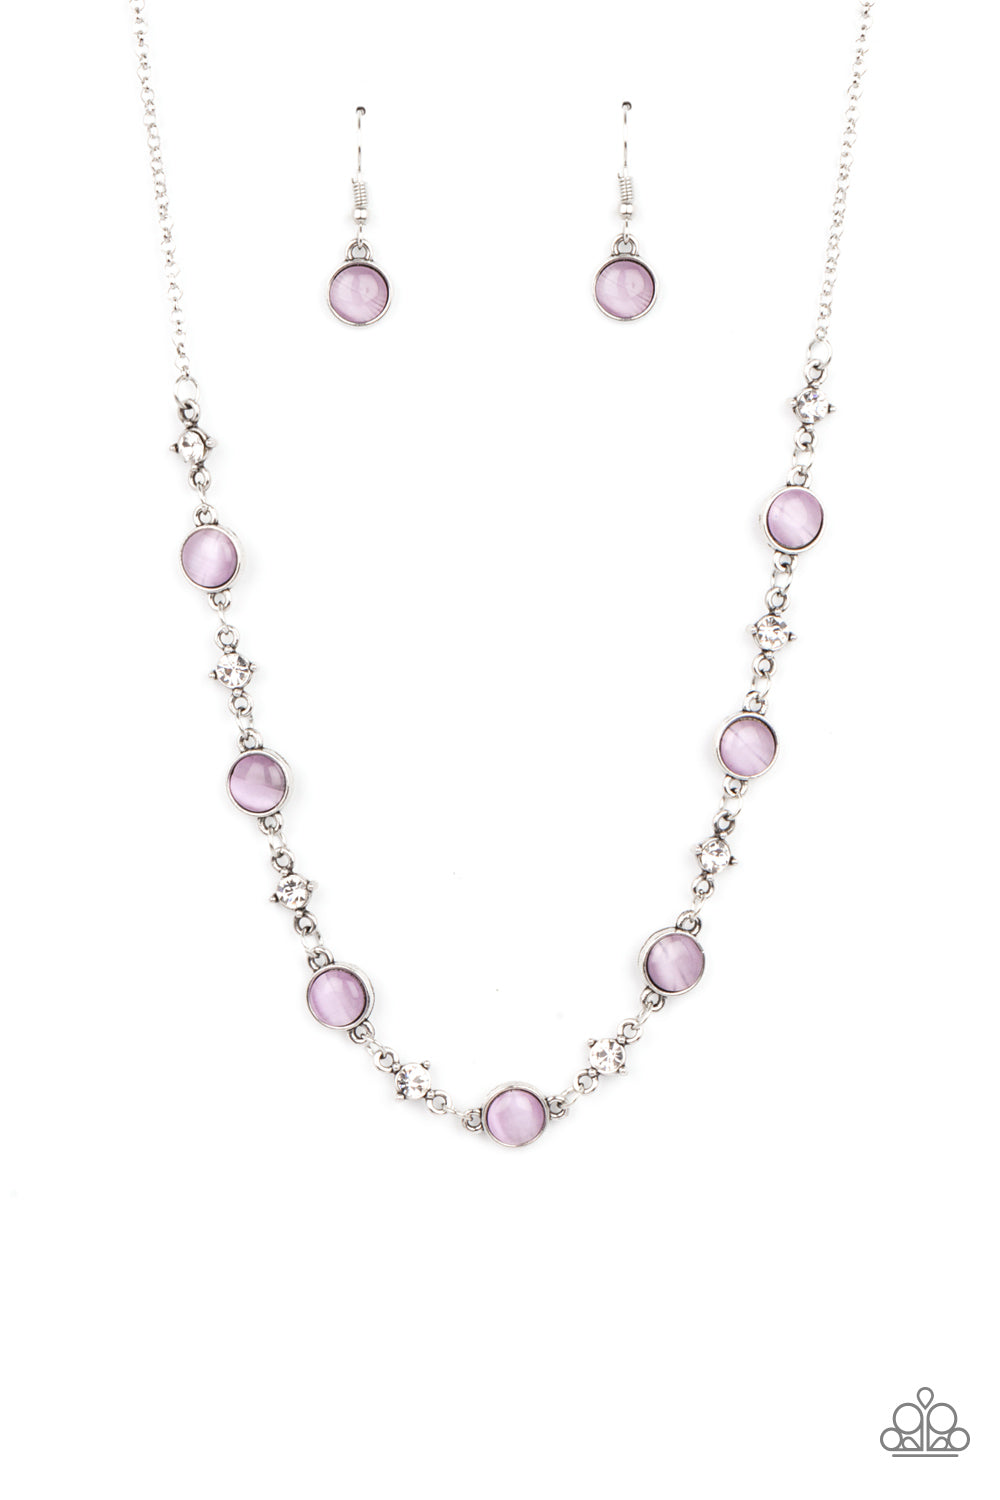 Inner Illumination Purple Necklace - Paparazzi Accessories  Encased in antiqued silver fittings, dainty white rhinestones and glowing Amethyst Orchid cat's eye stones delicately link below the collar for a timeless finish. Features an adjustable clasp closure.  All Paparazzi Accessories are lead free and nickel free!  Sold as one individual necklace. Includes one pair of matching earrings.  Get The Complete Look!  Bracelet: "Use Your ILLUMINATION - Purple" (Sold Separately)